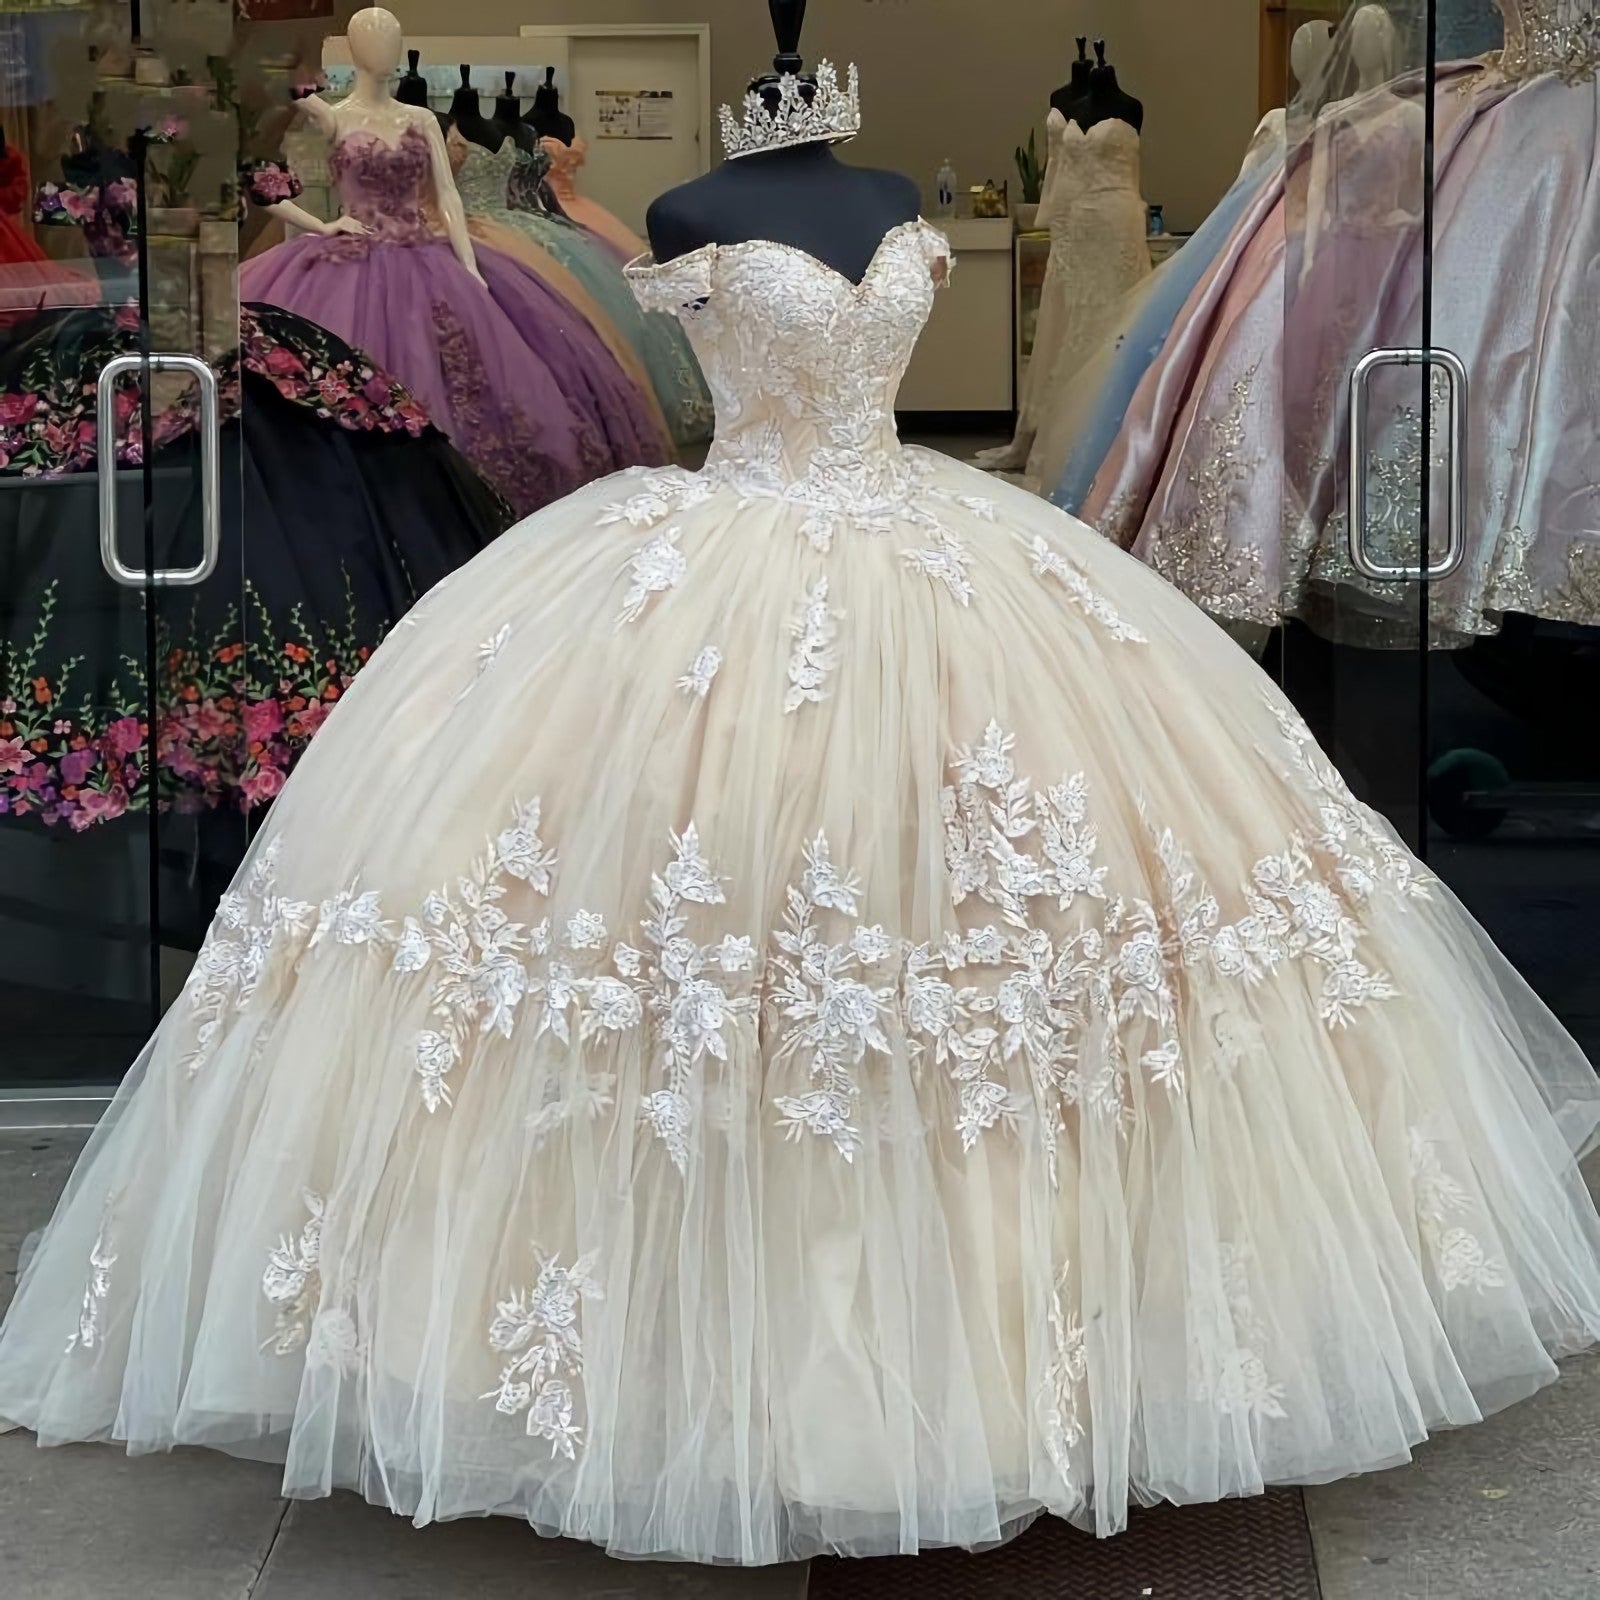 Prom Dresses Silk, Long Champagne Lace Appliques Quinceanera Dress, For 15 Year Ball Gowns Off The Shoulder Ball Gown Debutante Gowns Dresses, Prom Dress